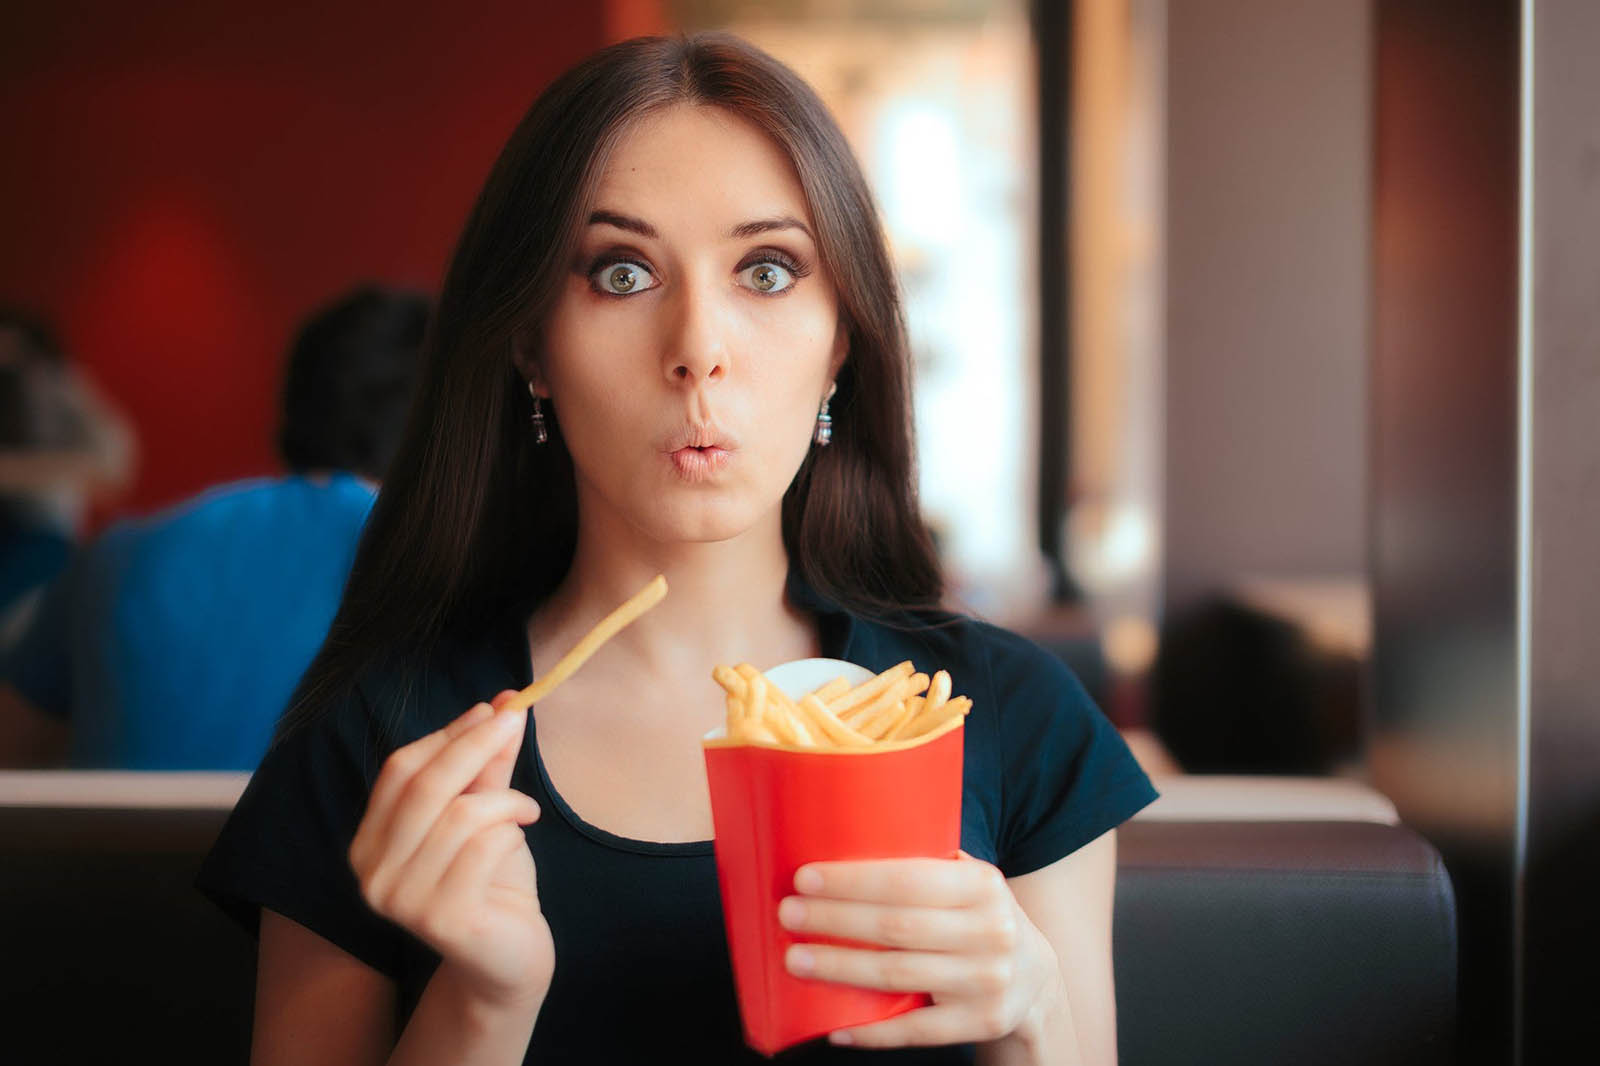 Eat Mega Meal to Know Vacation Spot You'd Feel Most at … Quiz Woman Eating Mcdonald's French Fries